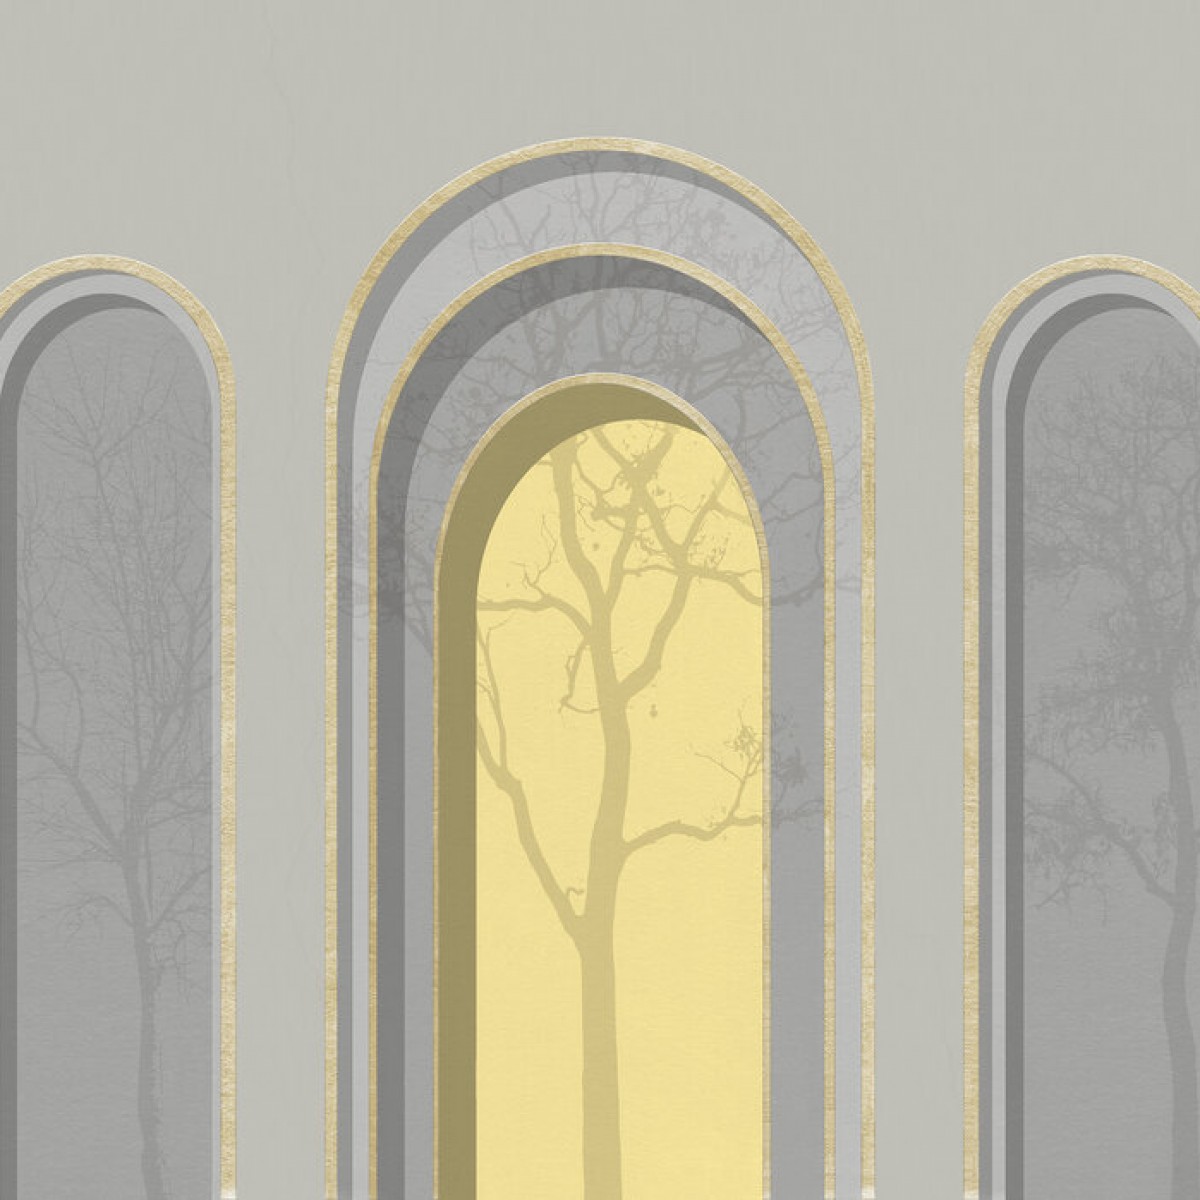 Fototapet Arch Adornment with Trees, Gray Yellow, Personalizat, Photowall, Fototapet living 